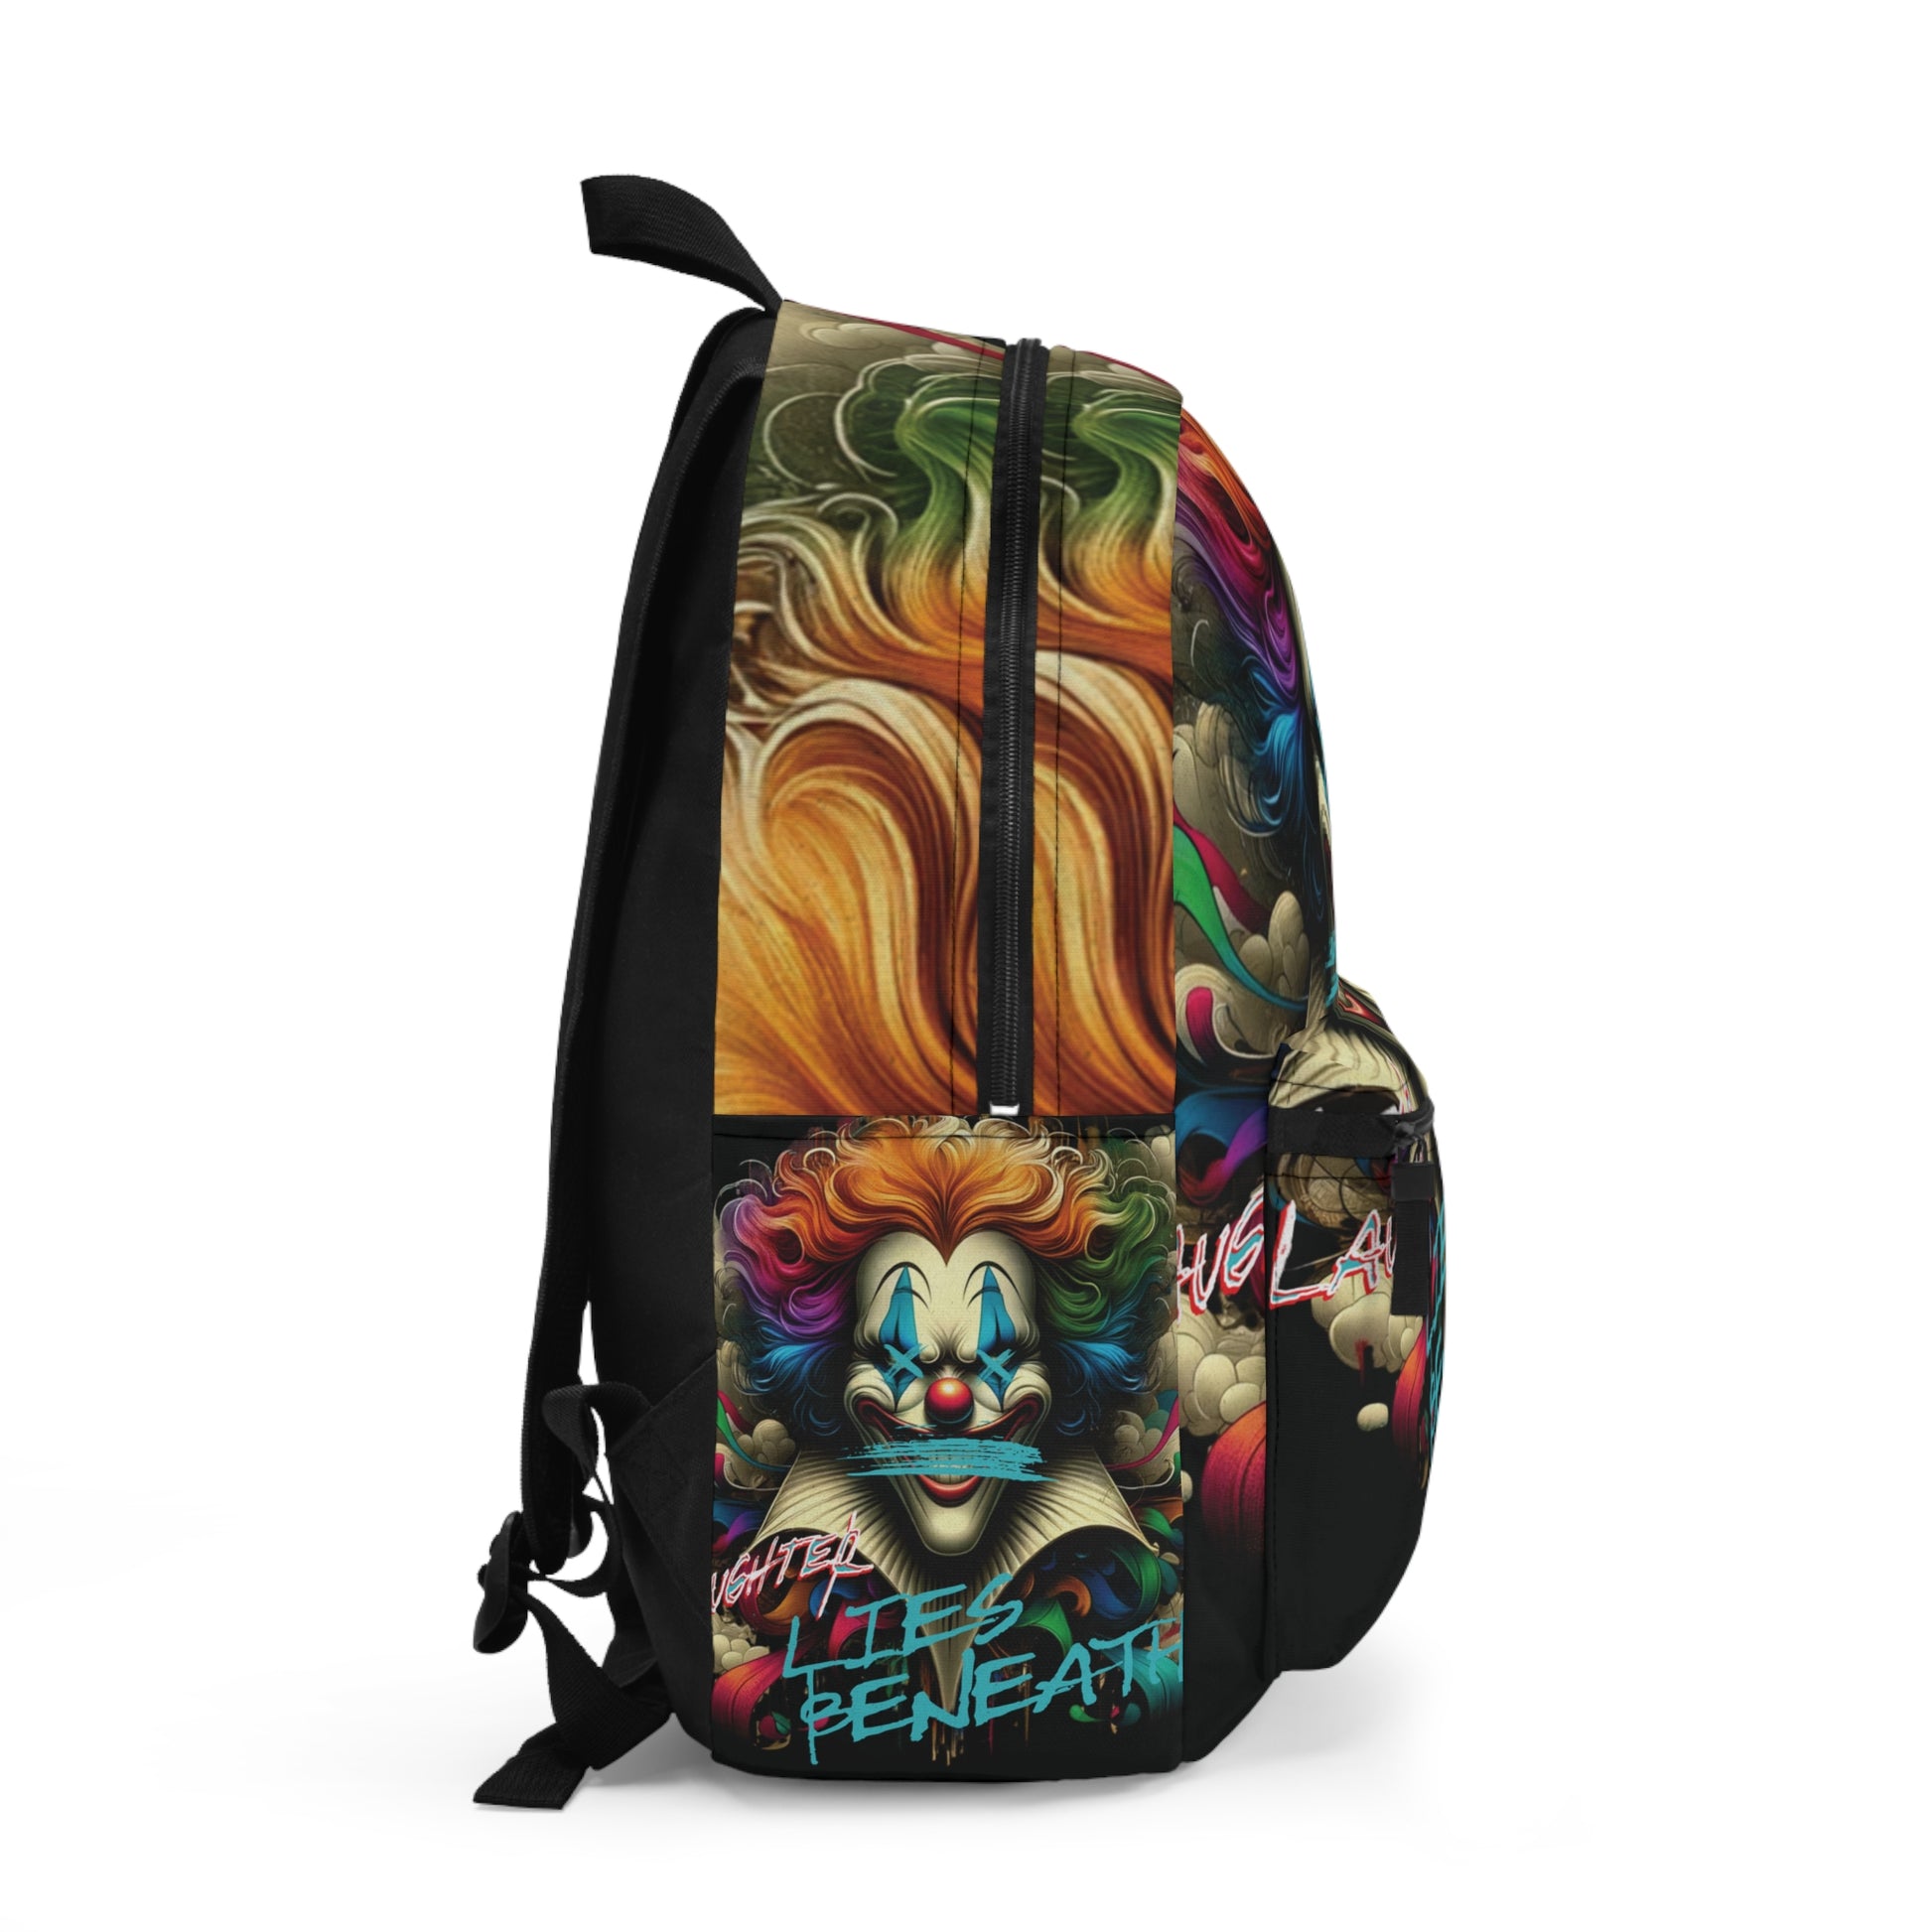 USA-assembled, globally sourced 'The Silent Prince' backpack with vibrant cut &amp; sew artwork.